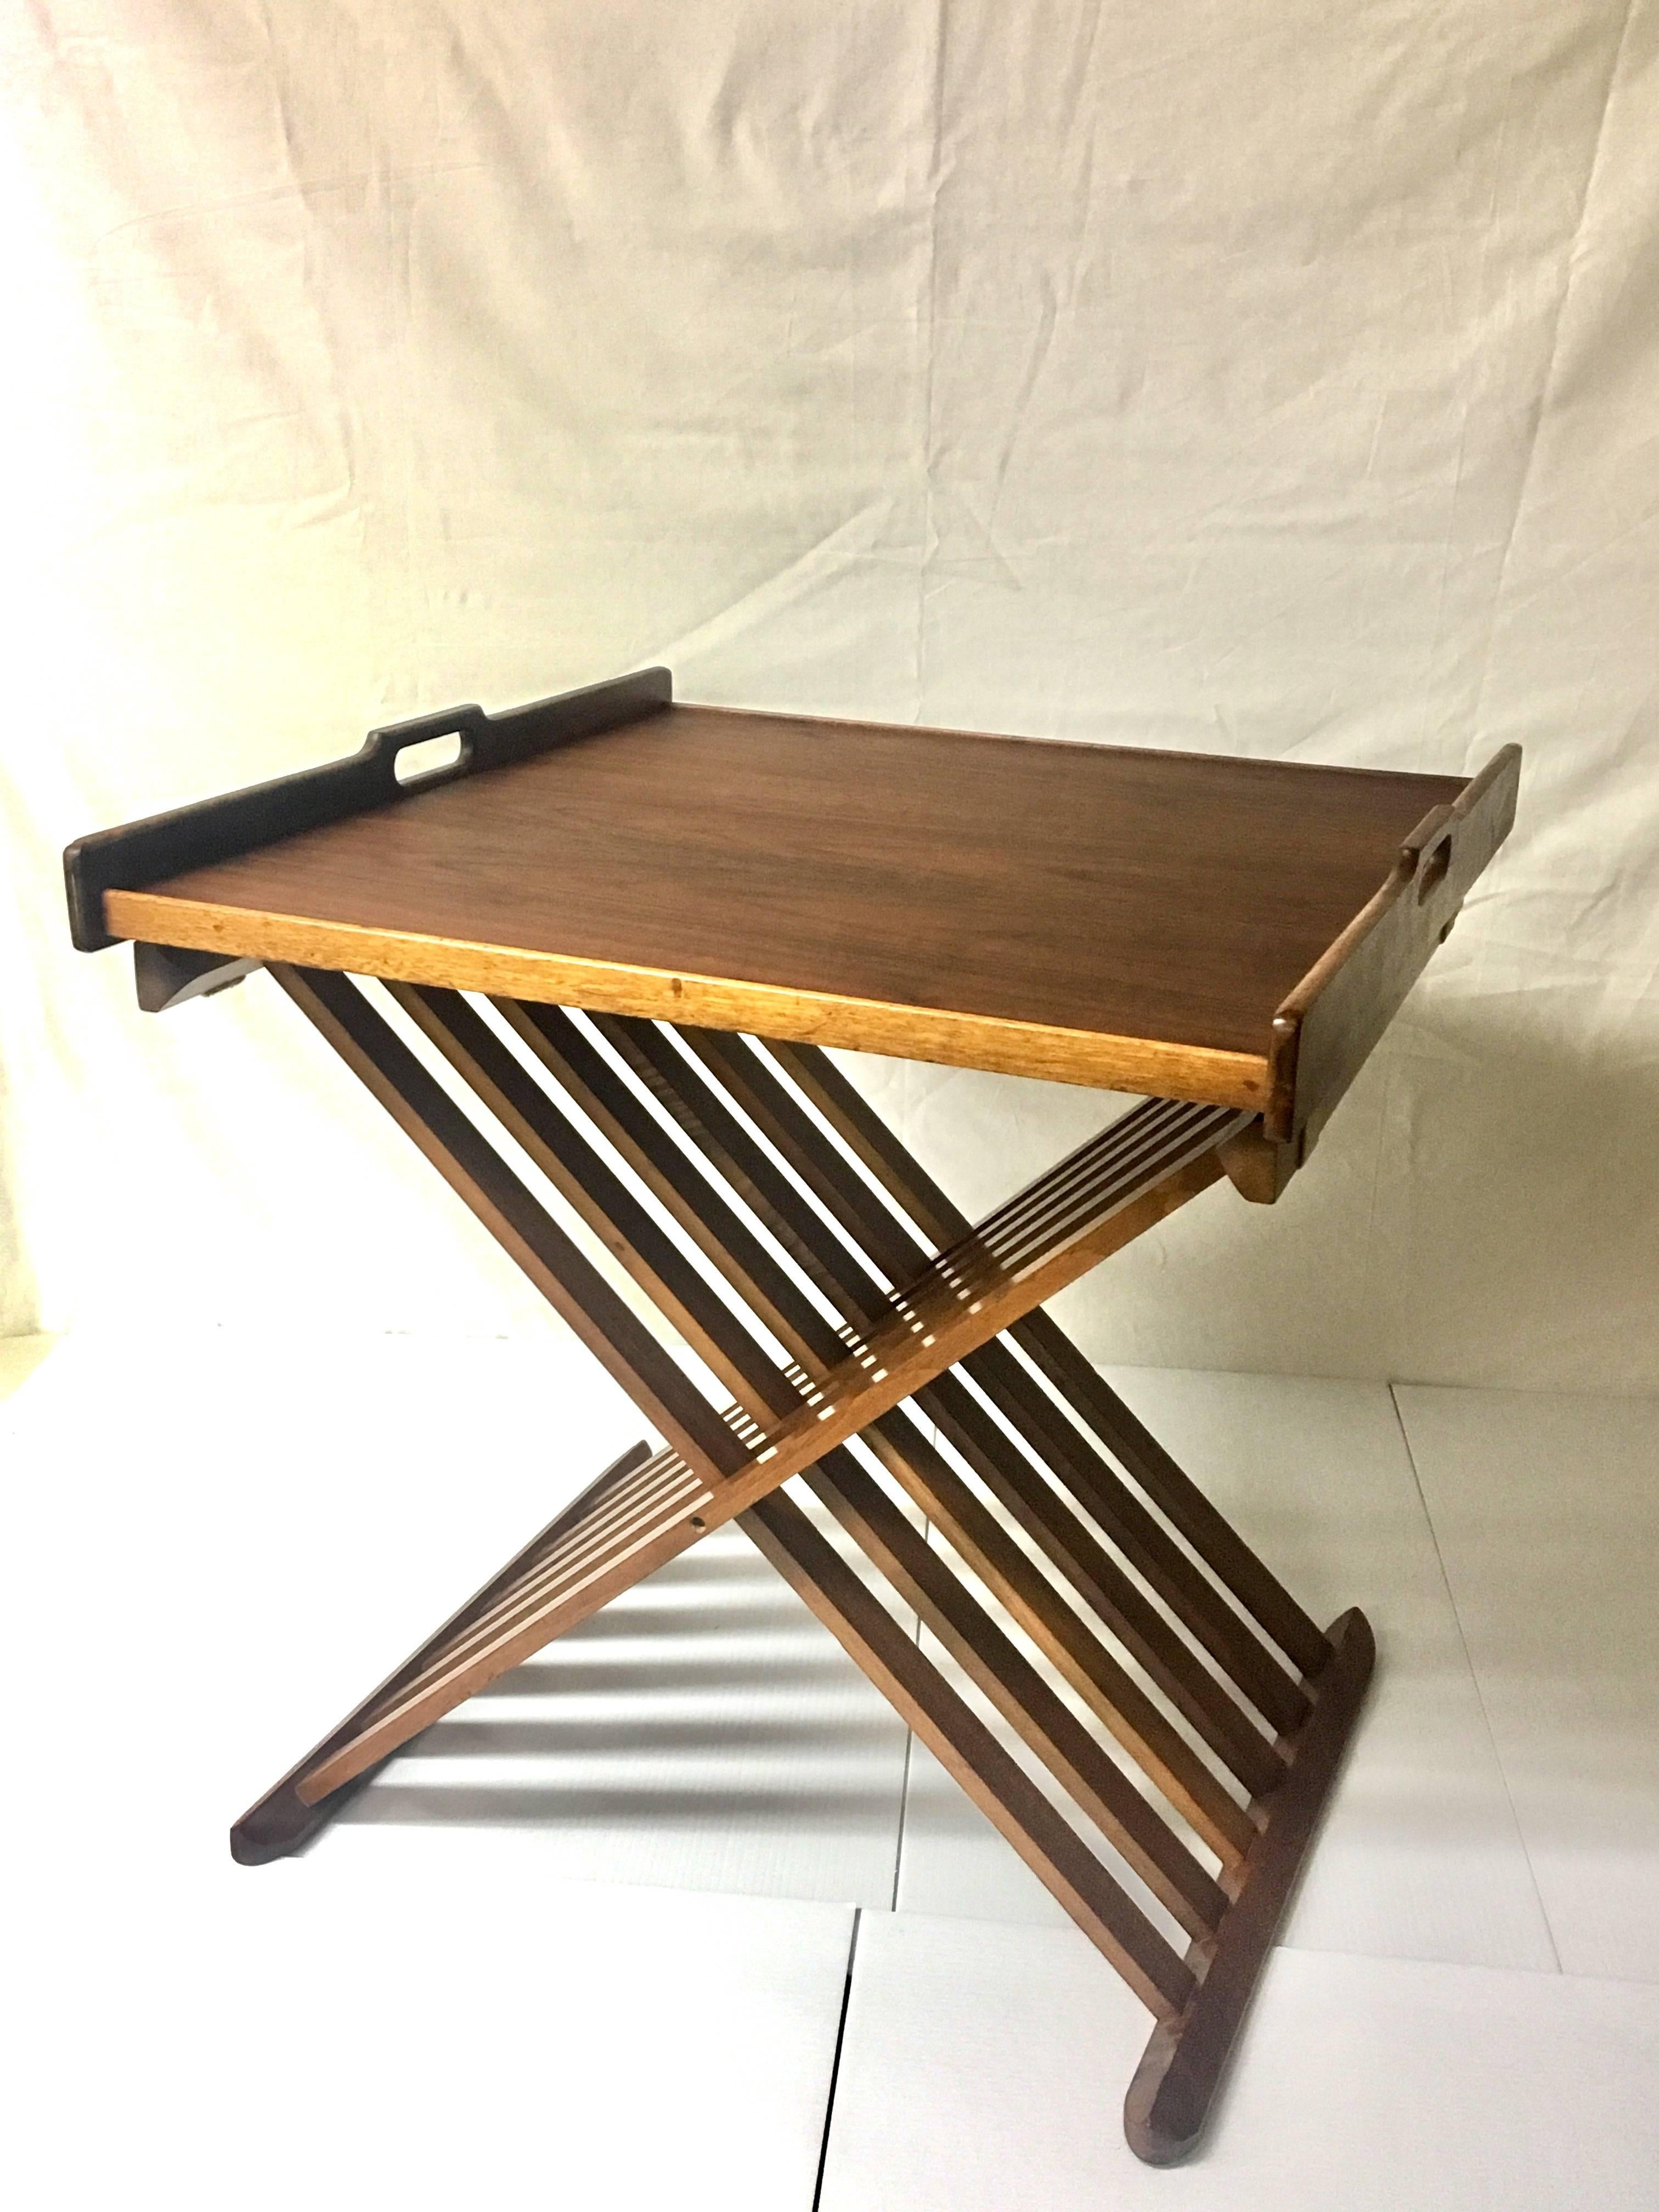 American walnut folding table designed by Kipp Stewart for Drexel, circa 1950s. The table is simple and elegant with a removable tray for easy storage. The piece is in very nice vintage condition and the tray has been recently refinished and oiled.